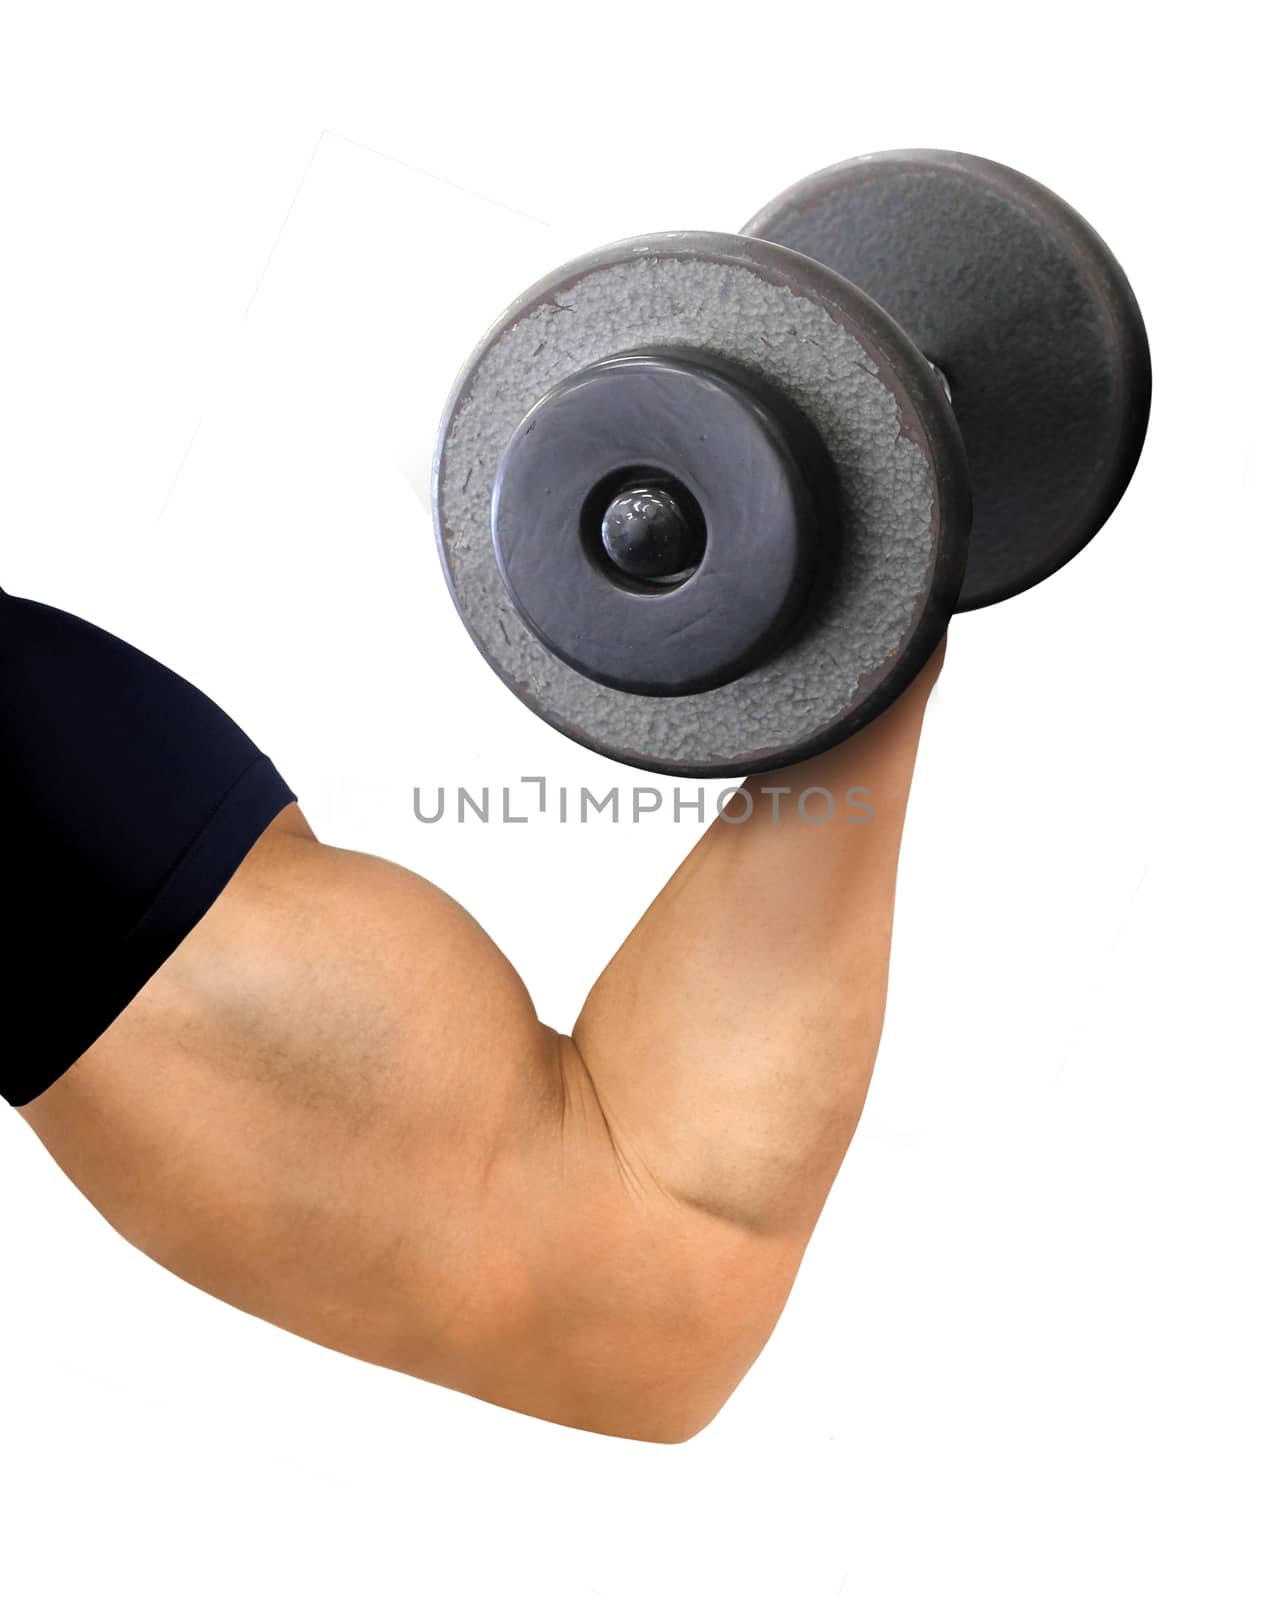 Muscular Arm and Hand Holding Dumbbell by razihusin